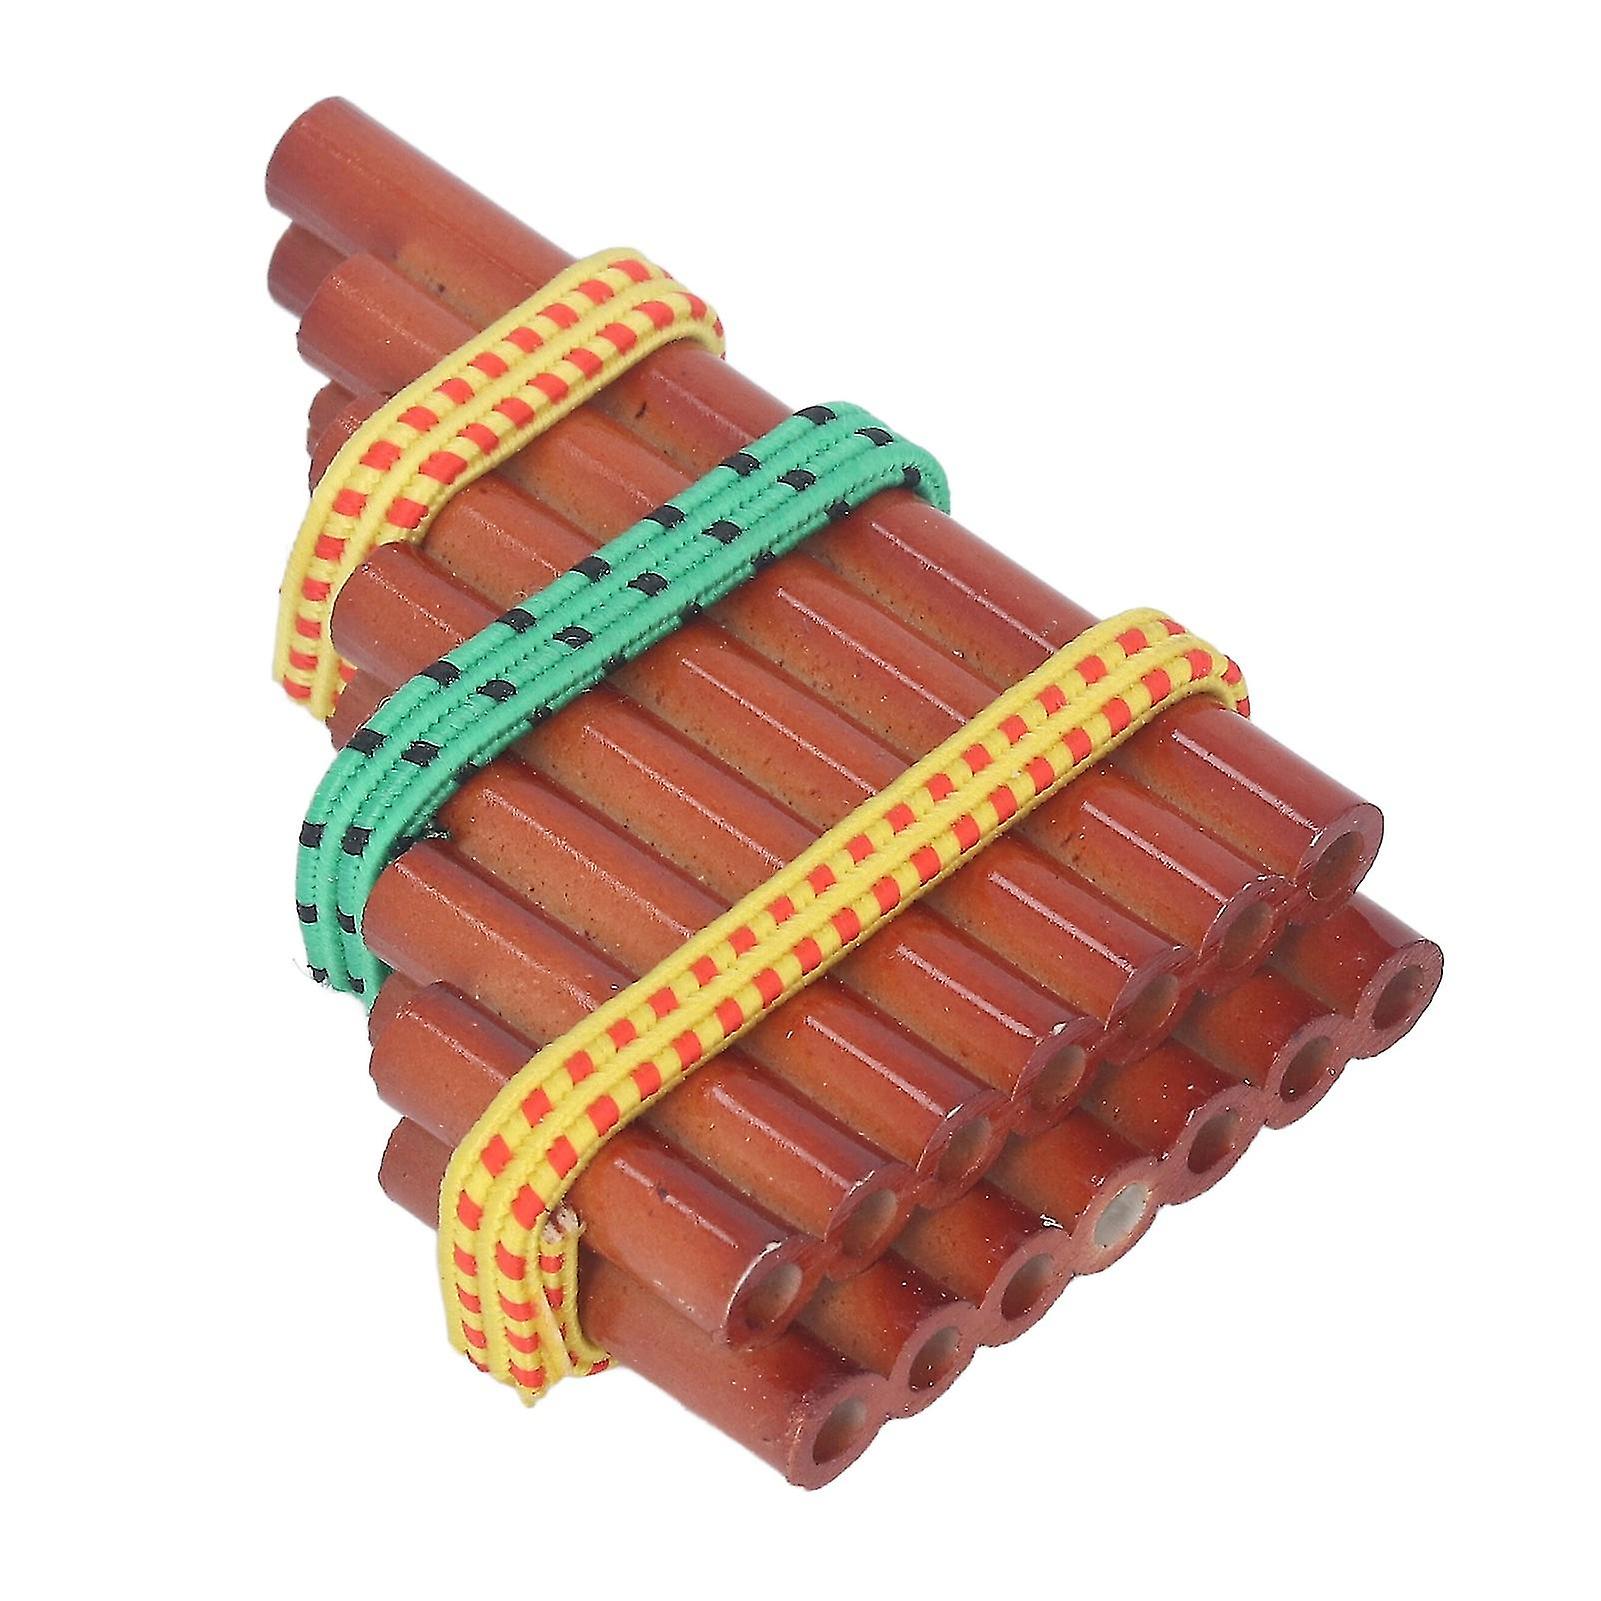 Dollhouse Bamboo Pan Flute Miniature Dollhouse Musical Instrument Decorative Furniture Toy